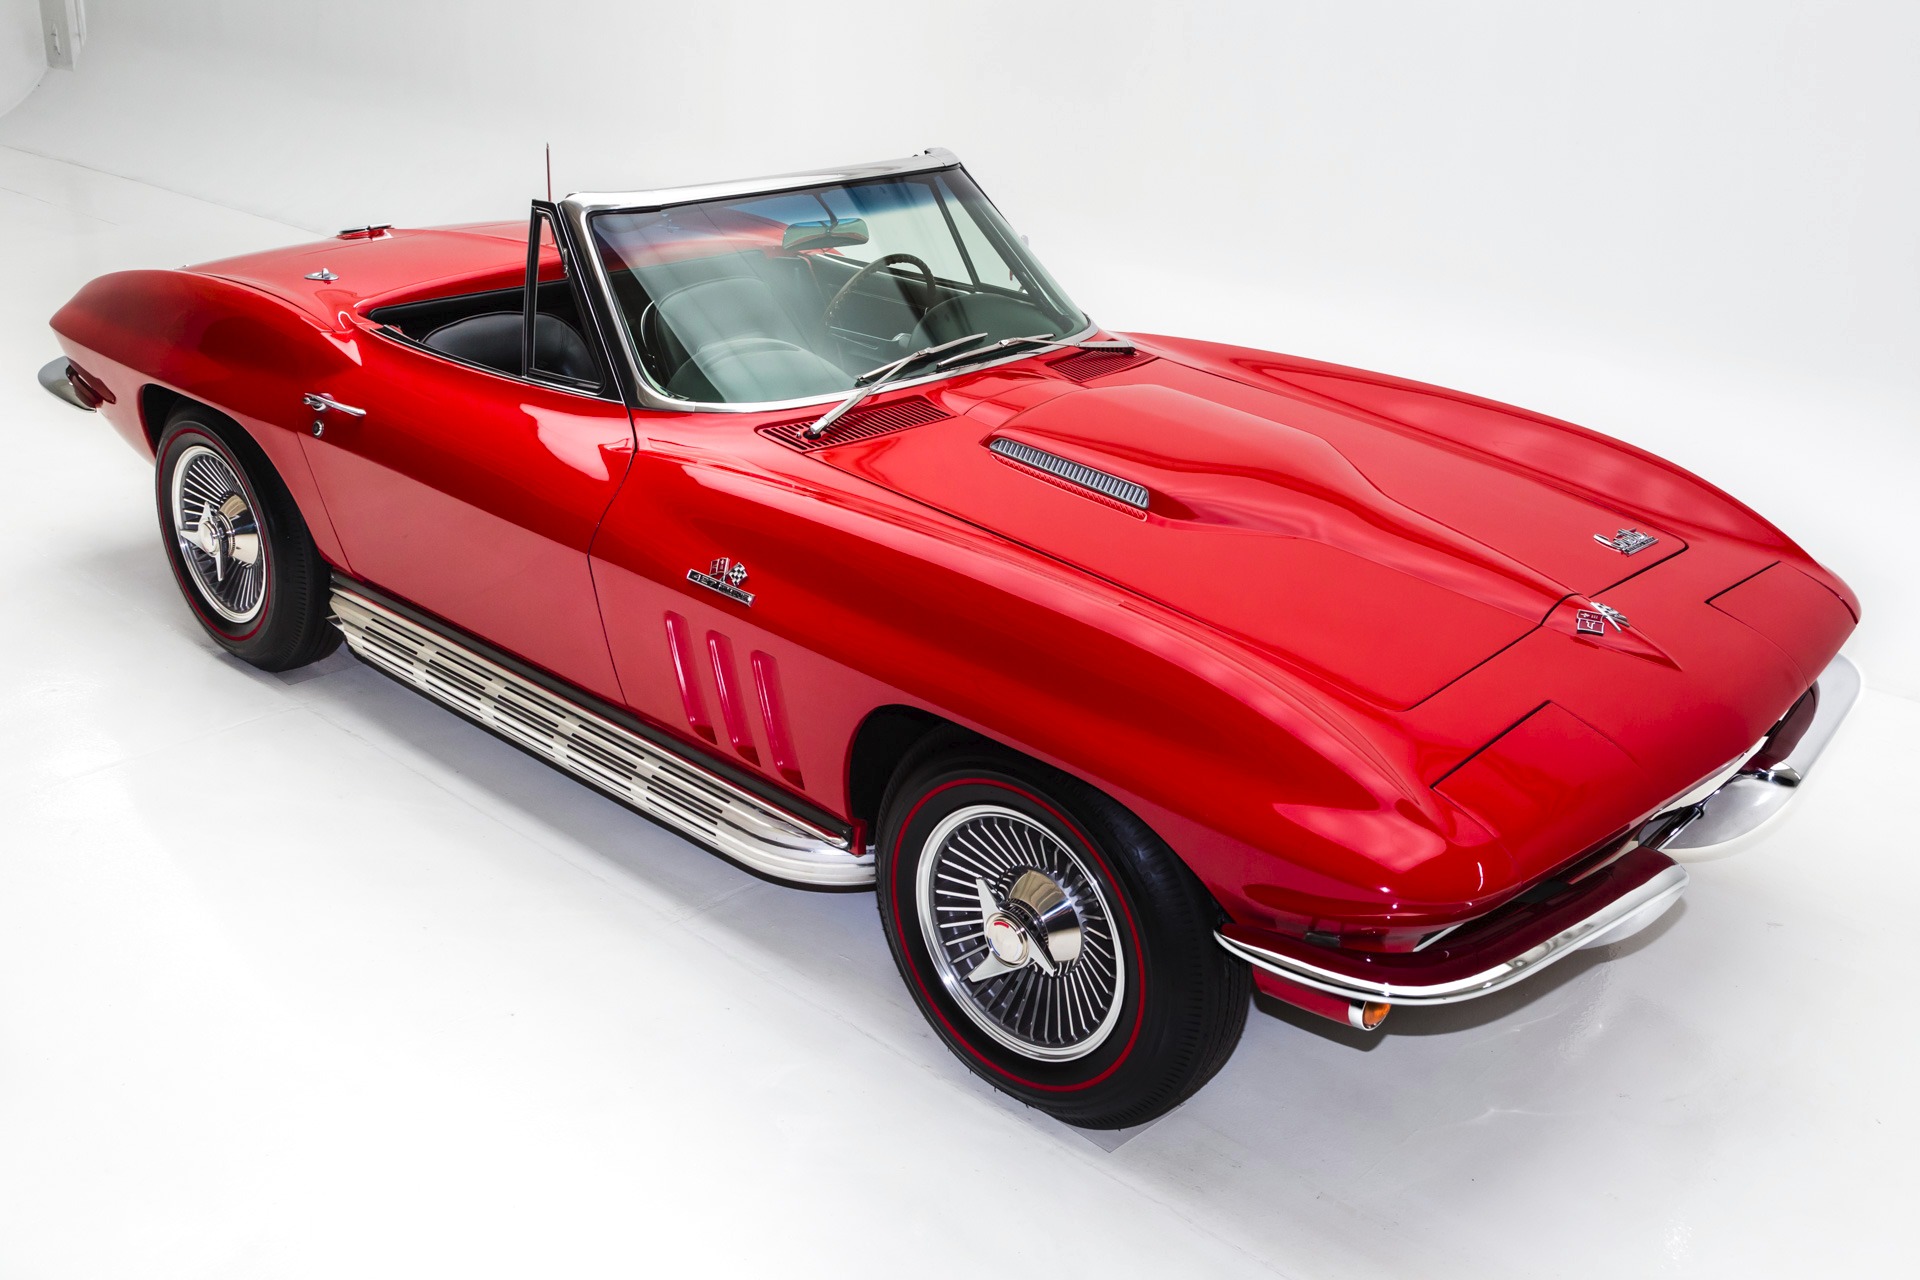 These real Rally Red paint pictures of real 1966 Chevy Corvette really show...